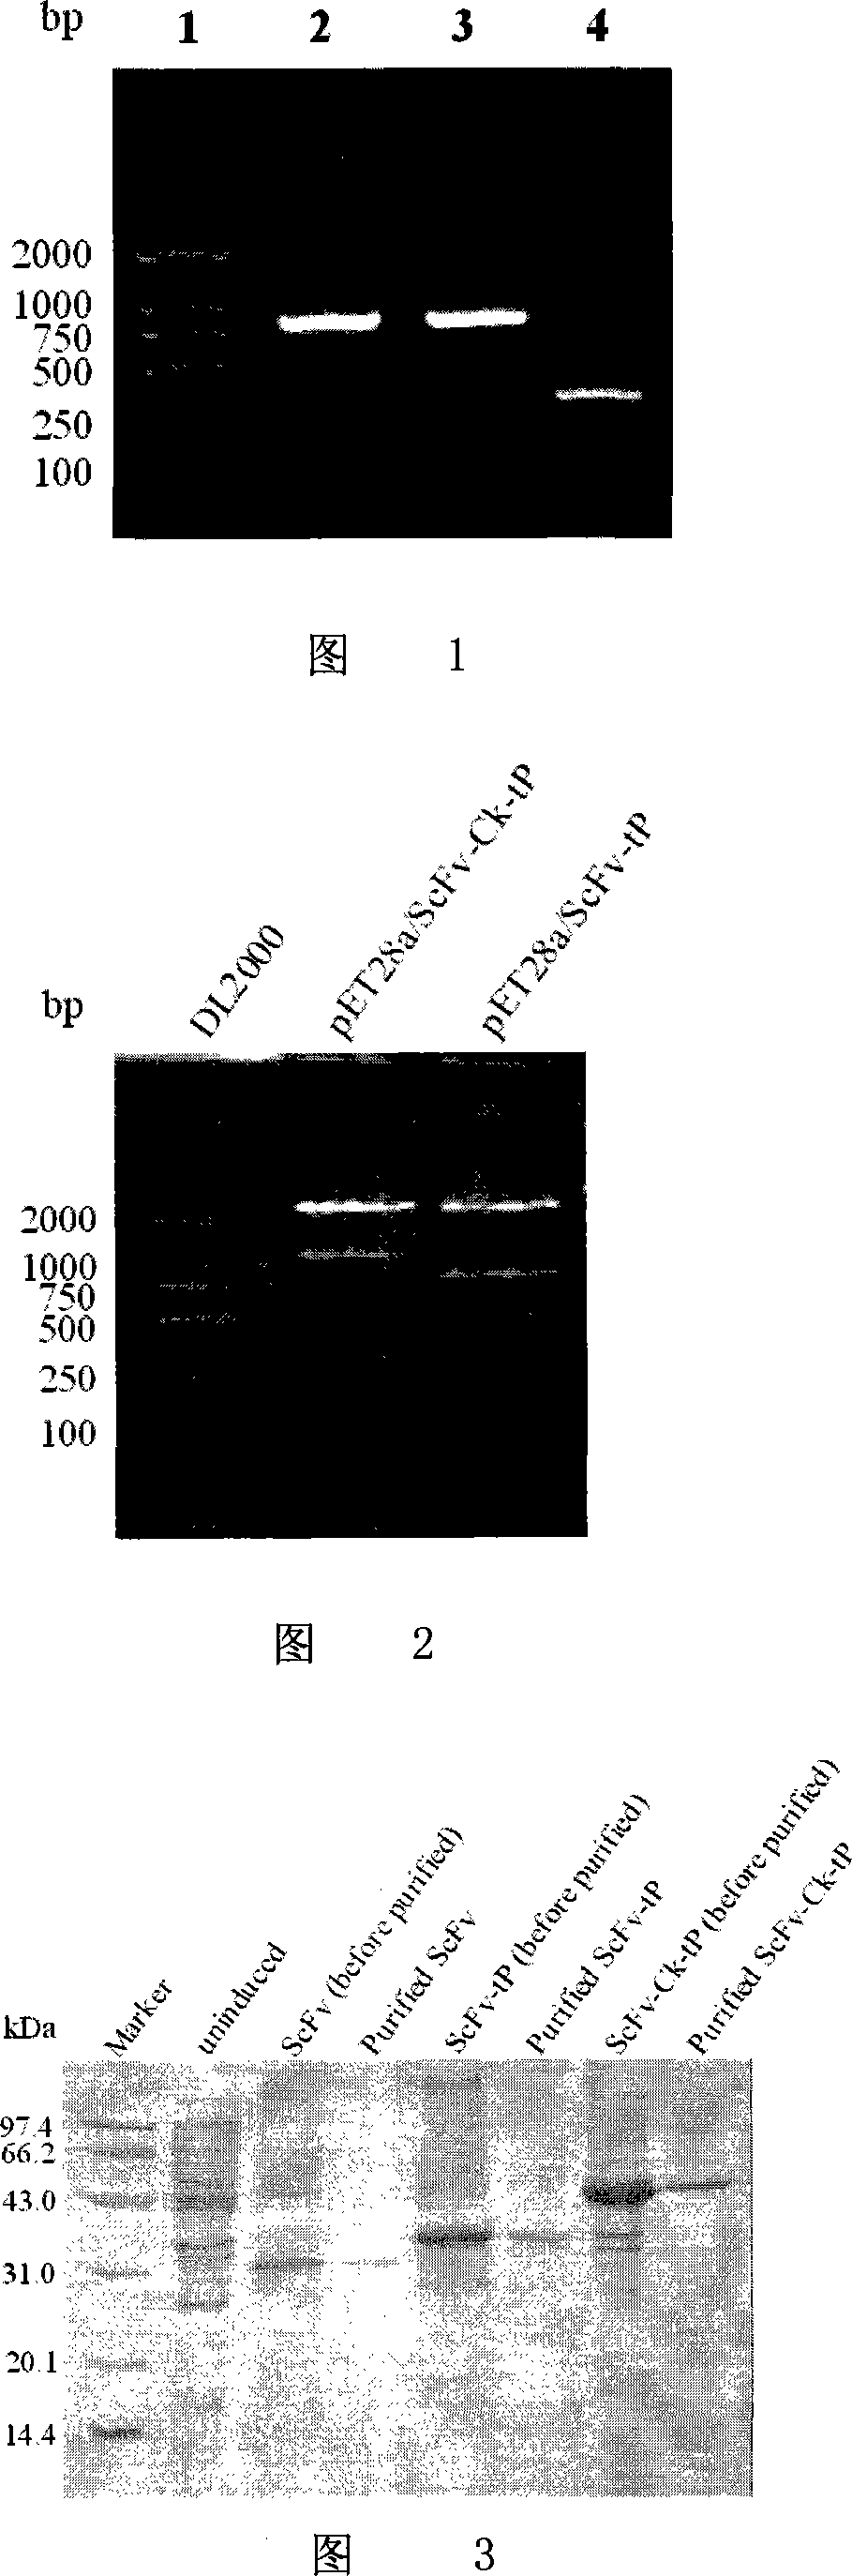 Human anti-HBsAg single-chain antibody/human antibody light chain constant region/protamine truncated recombination gene, coding protein and application